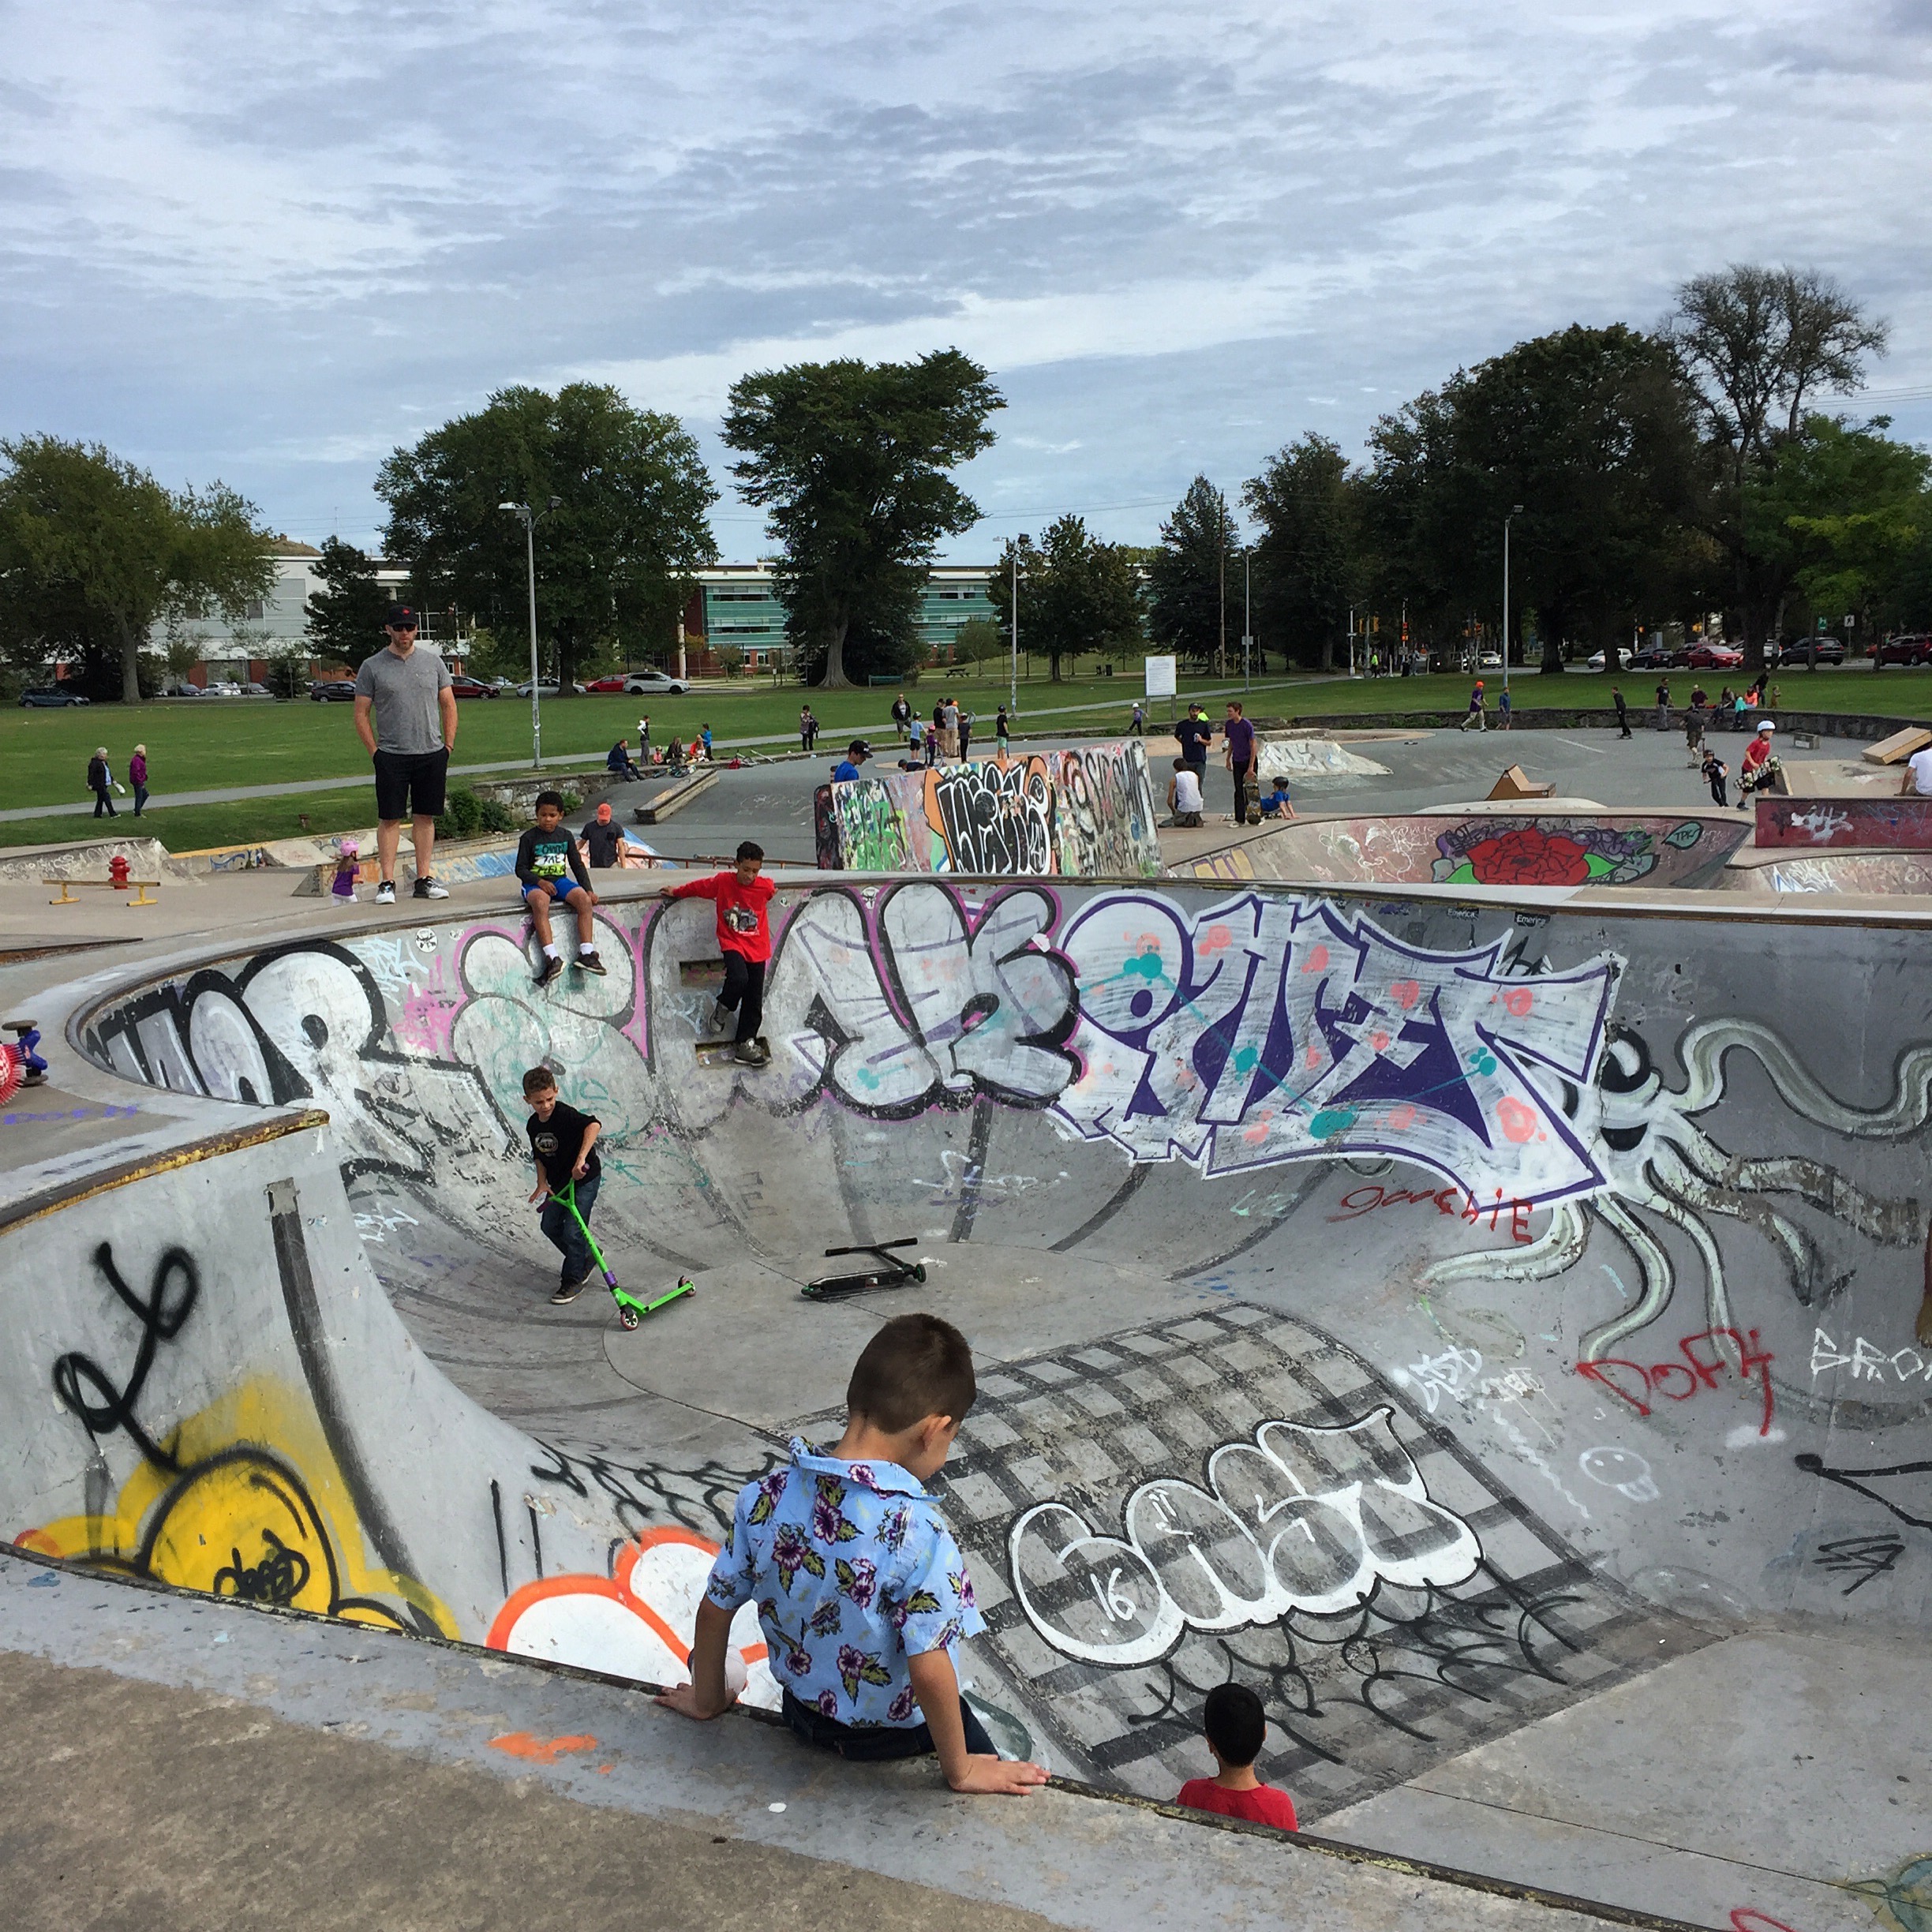  HALIFAX | Taim Habash, 5, looks on as the big kids skate around the park pit. His family was resettled to Canada nine months ago from Lebanon, as part of the Liberal government's ambitious plan to bring 25,000 Syrian refugees to Canada. October 3, 2